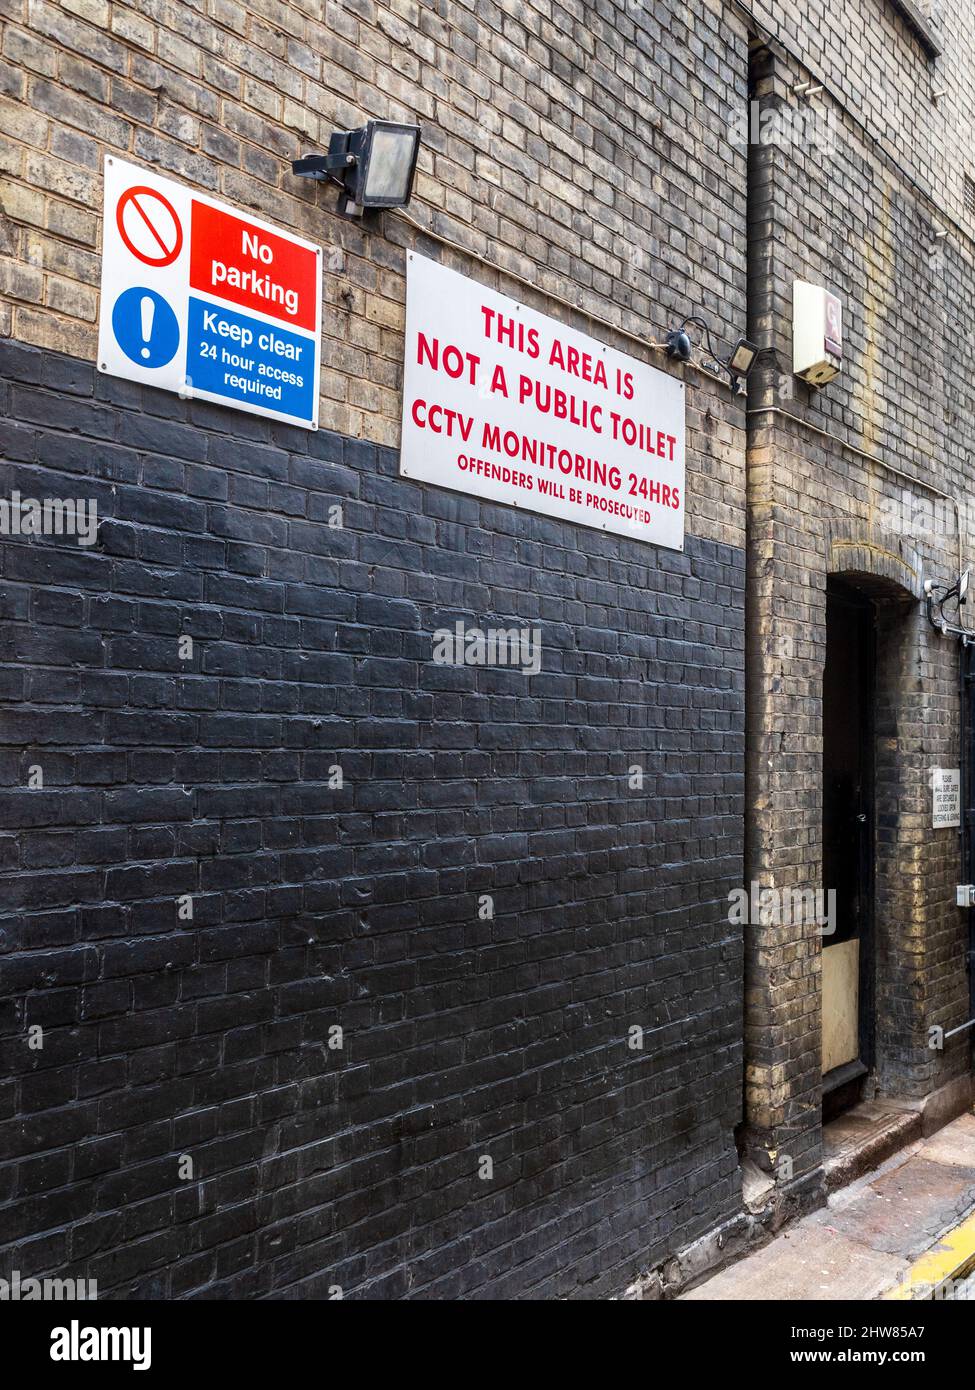 This is not a public toilet warning sign in a London alley. Sign in an alley warning against urination and CCTV monitoring. Stock Photo